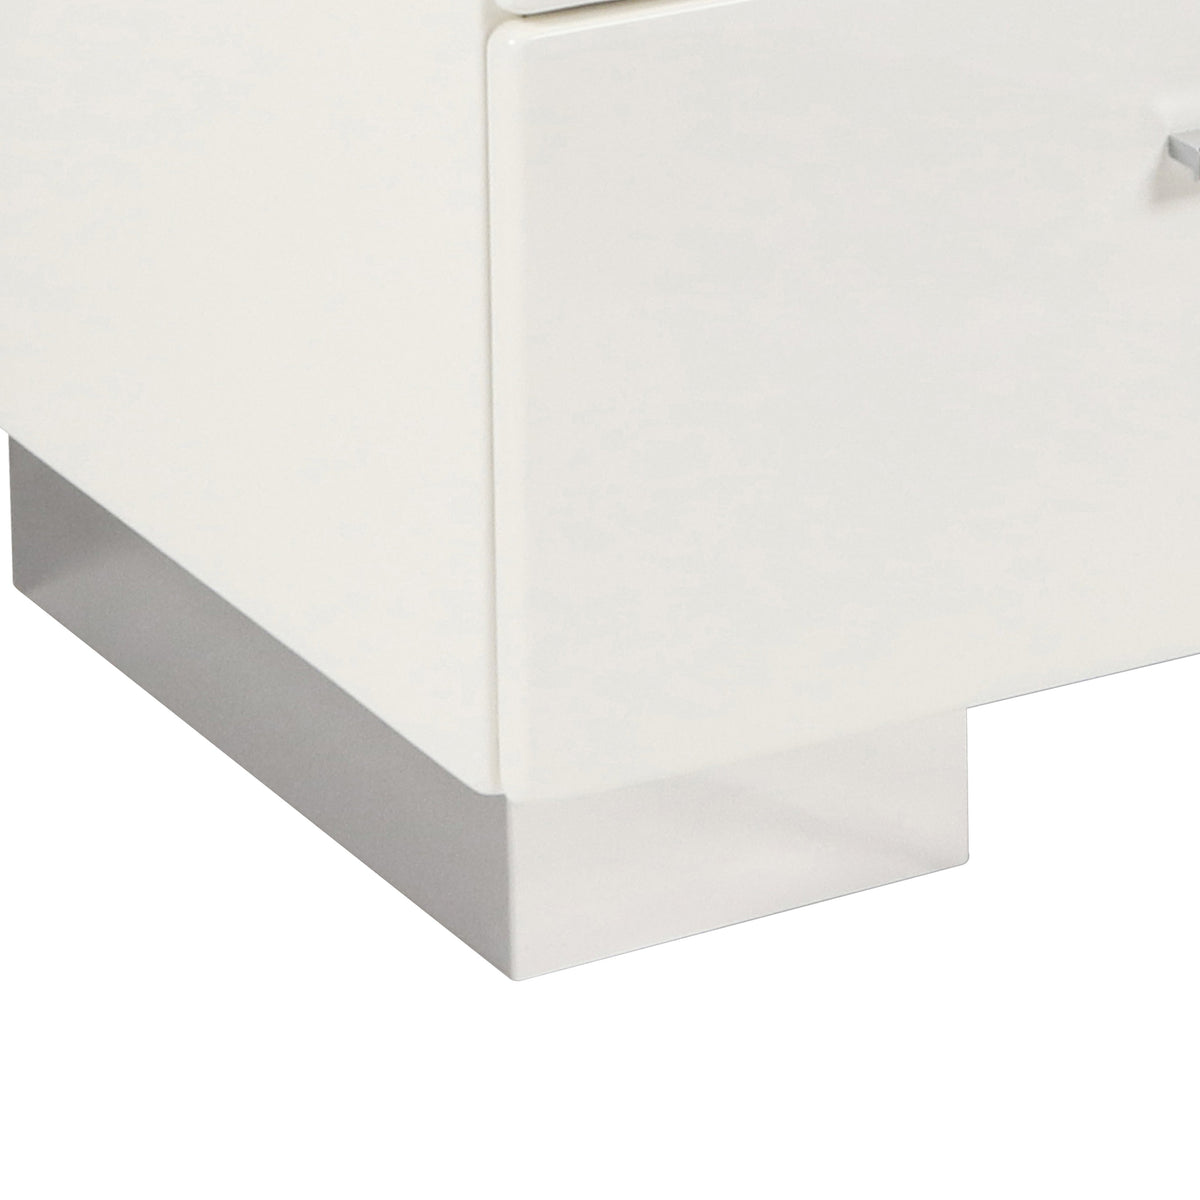 2 Drawer Wooden Nightstand with Metal Base and Bar Handles, White - BM223271